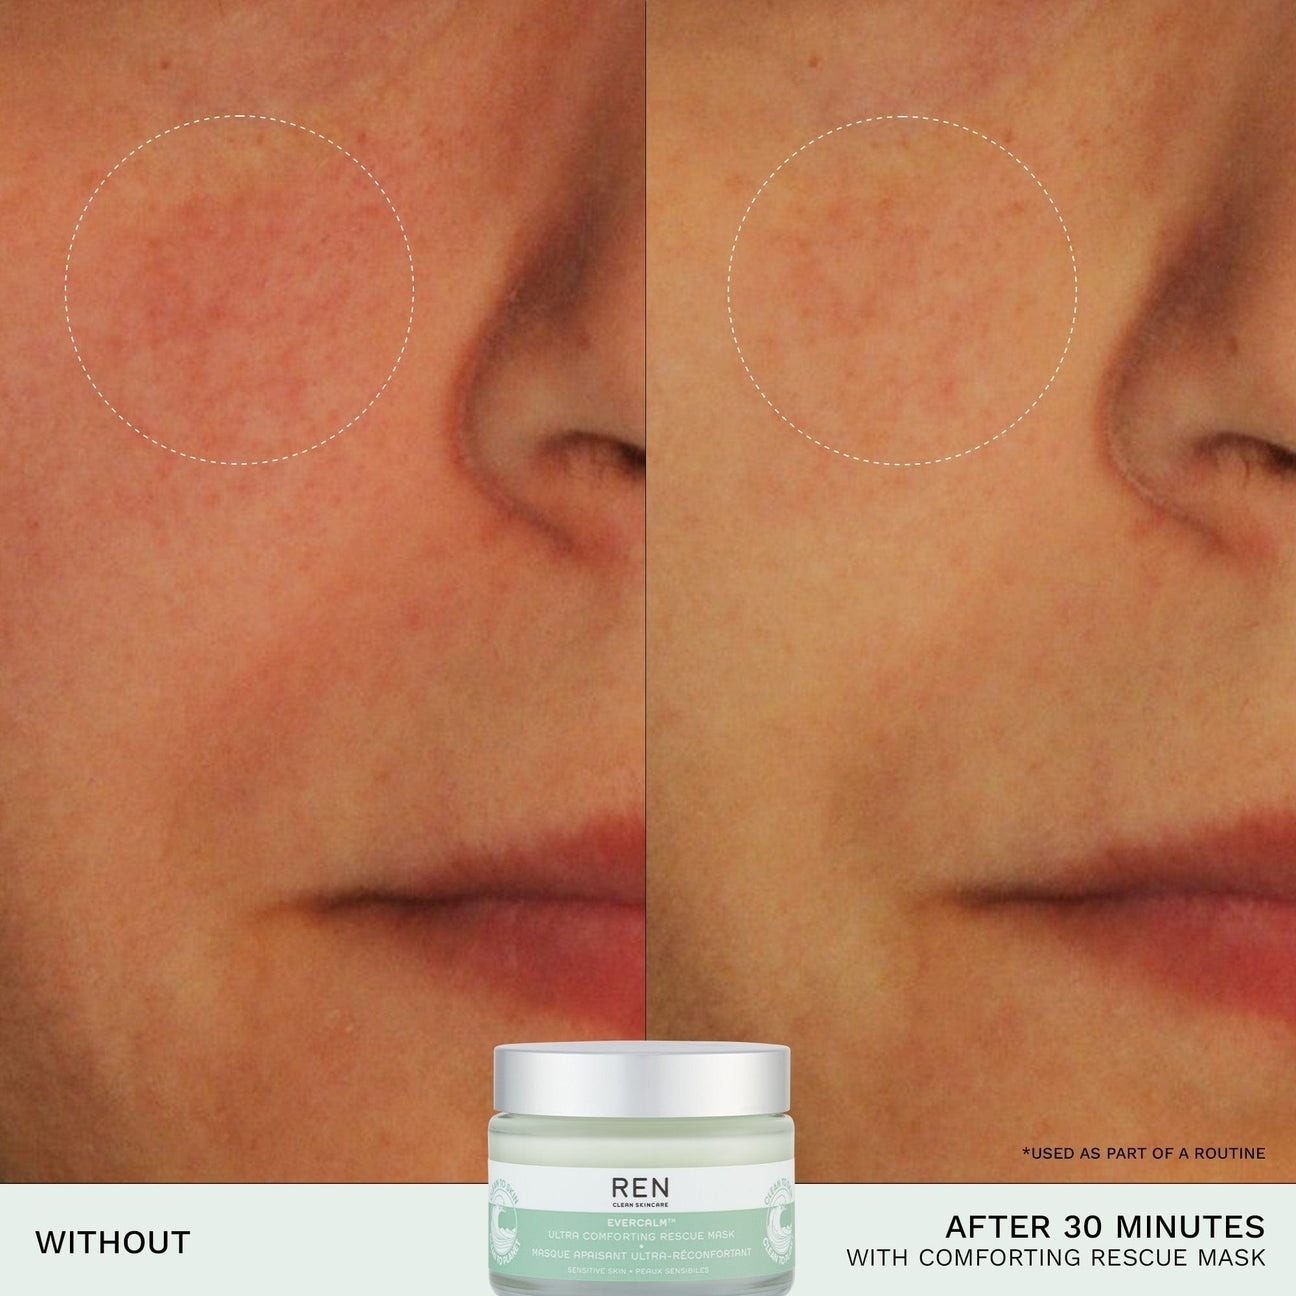 before-and-after of model with redness (left) and less redness (right) on face after using the mask